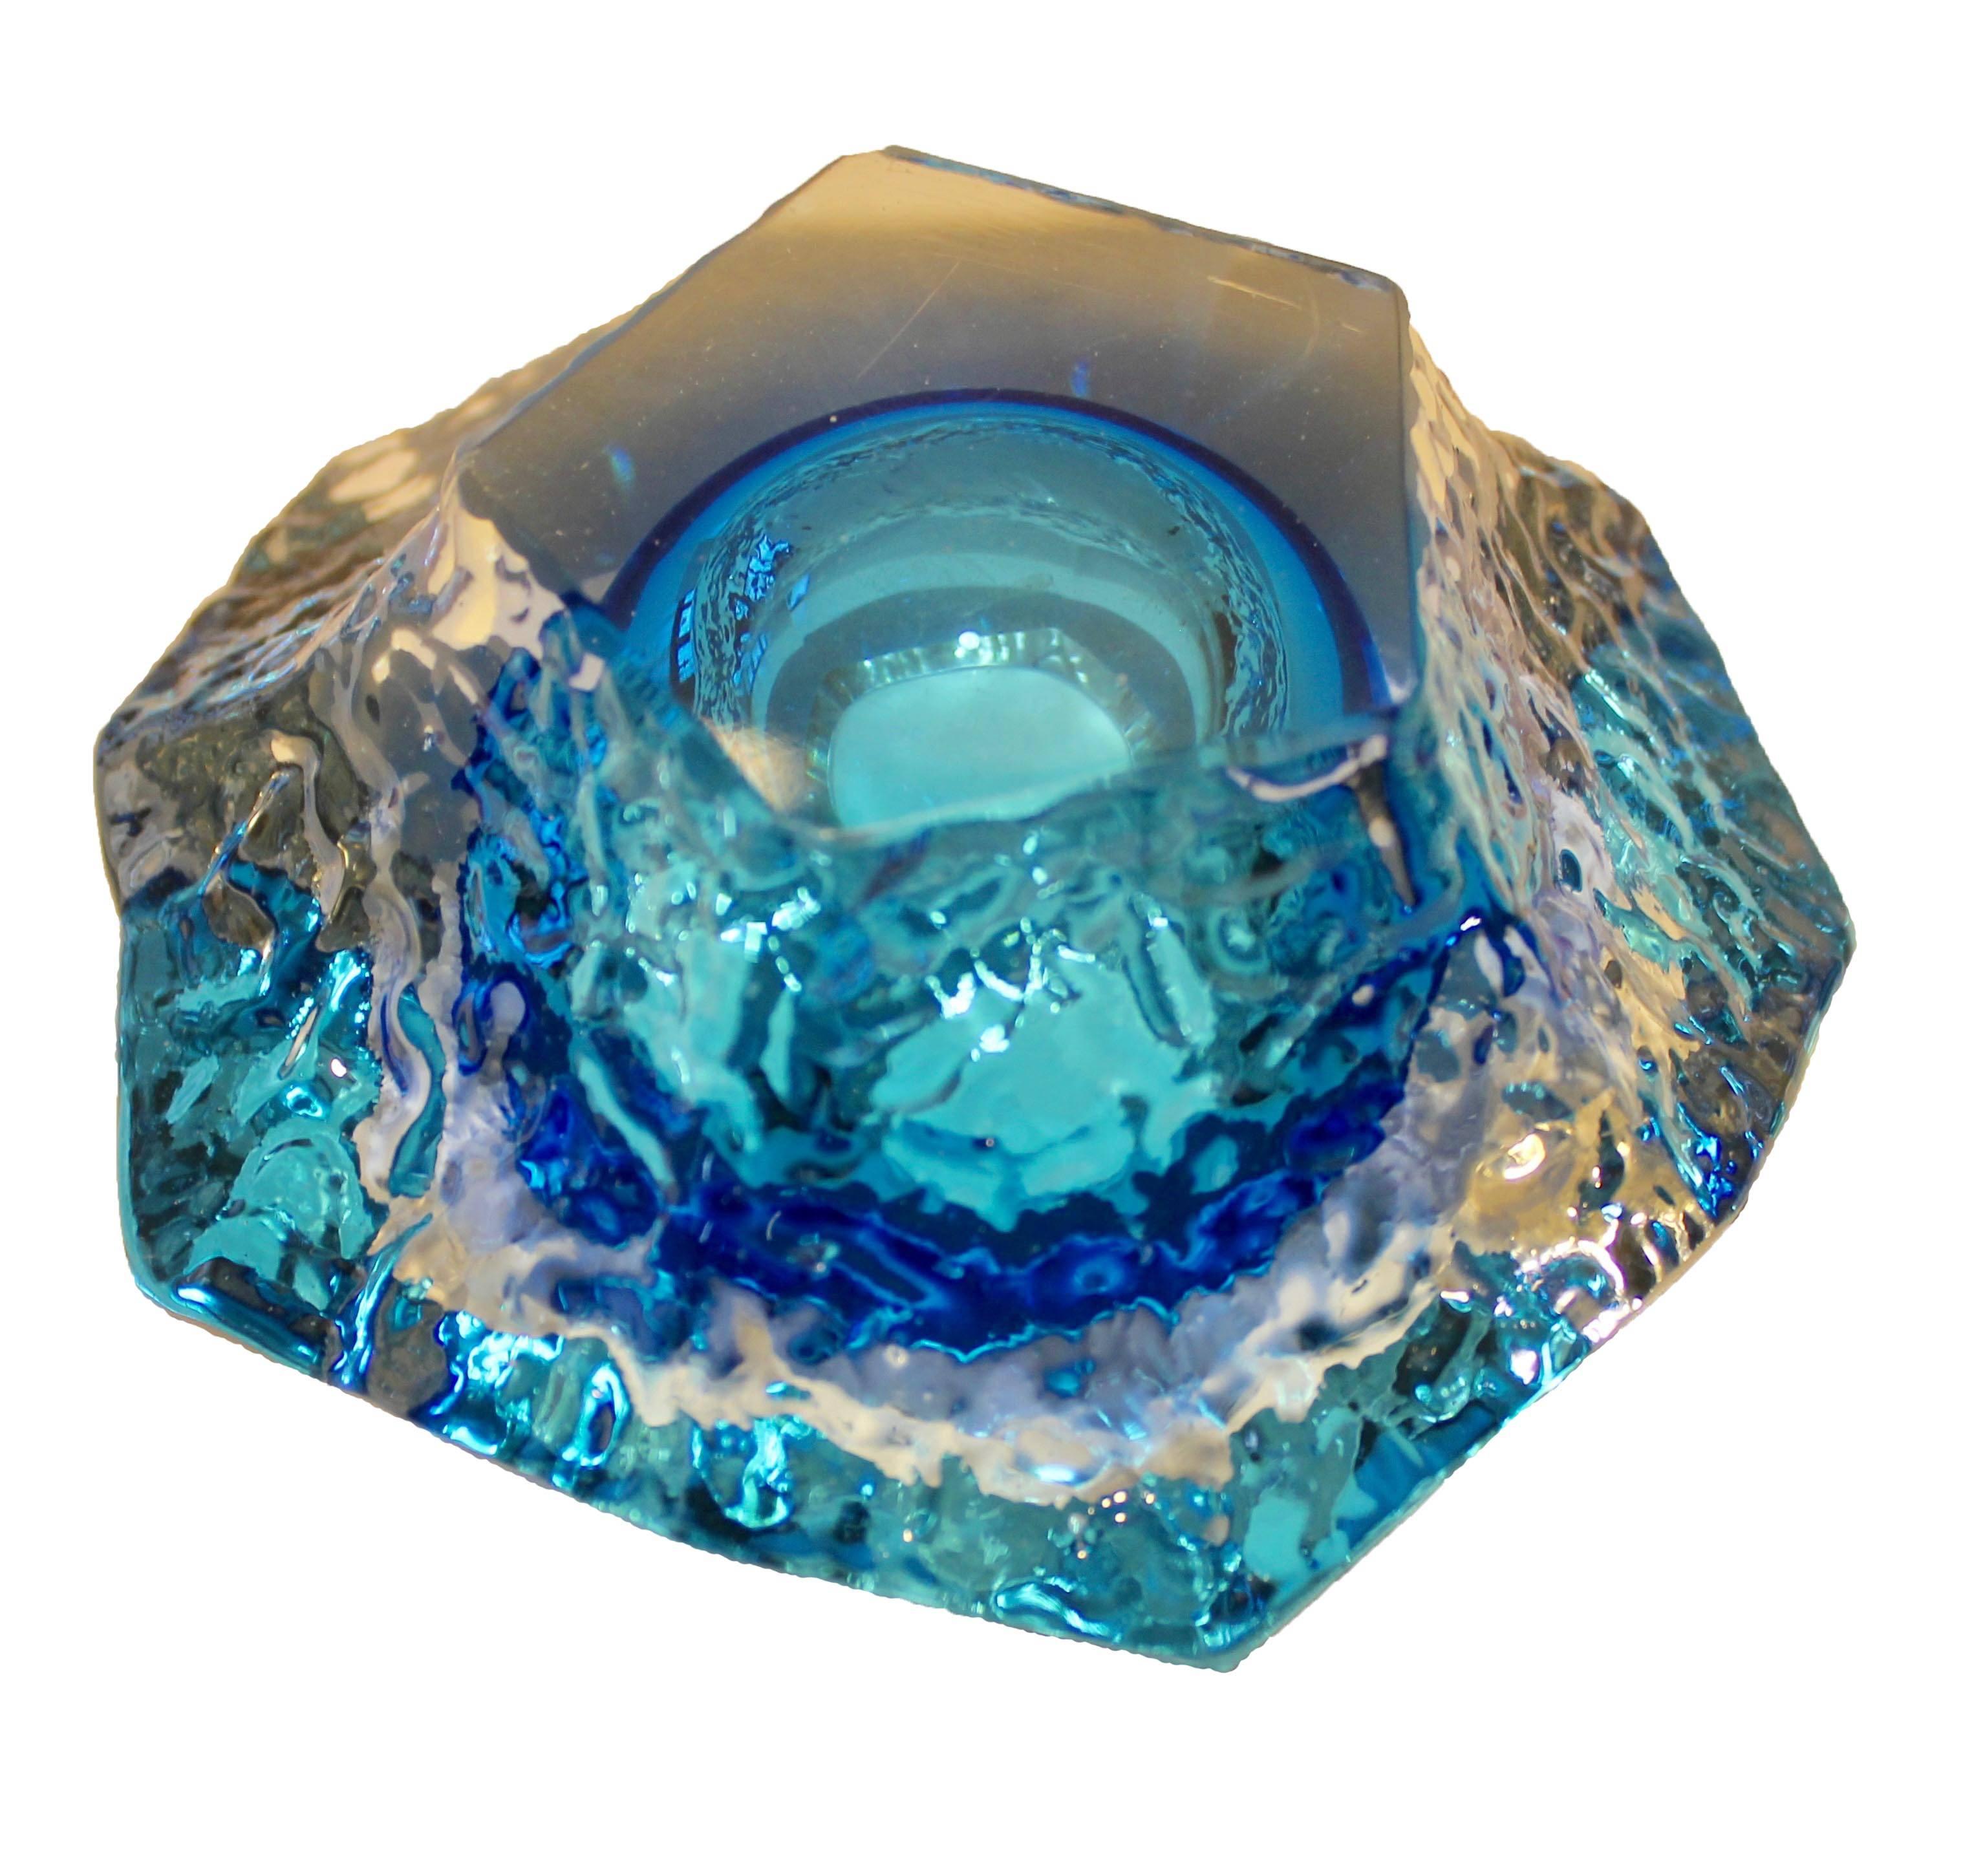 Hand-Crafted Textured and Faceted 'Sommerso' Blue Ice Glass Vessel by Mandruzzato